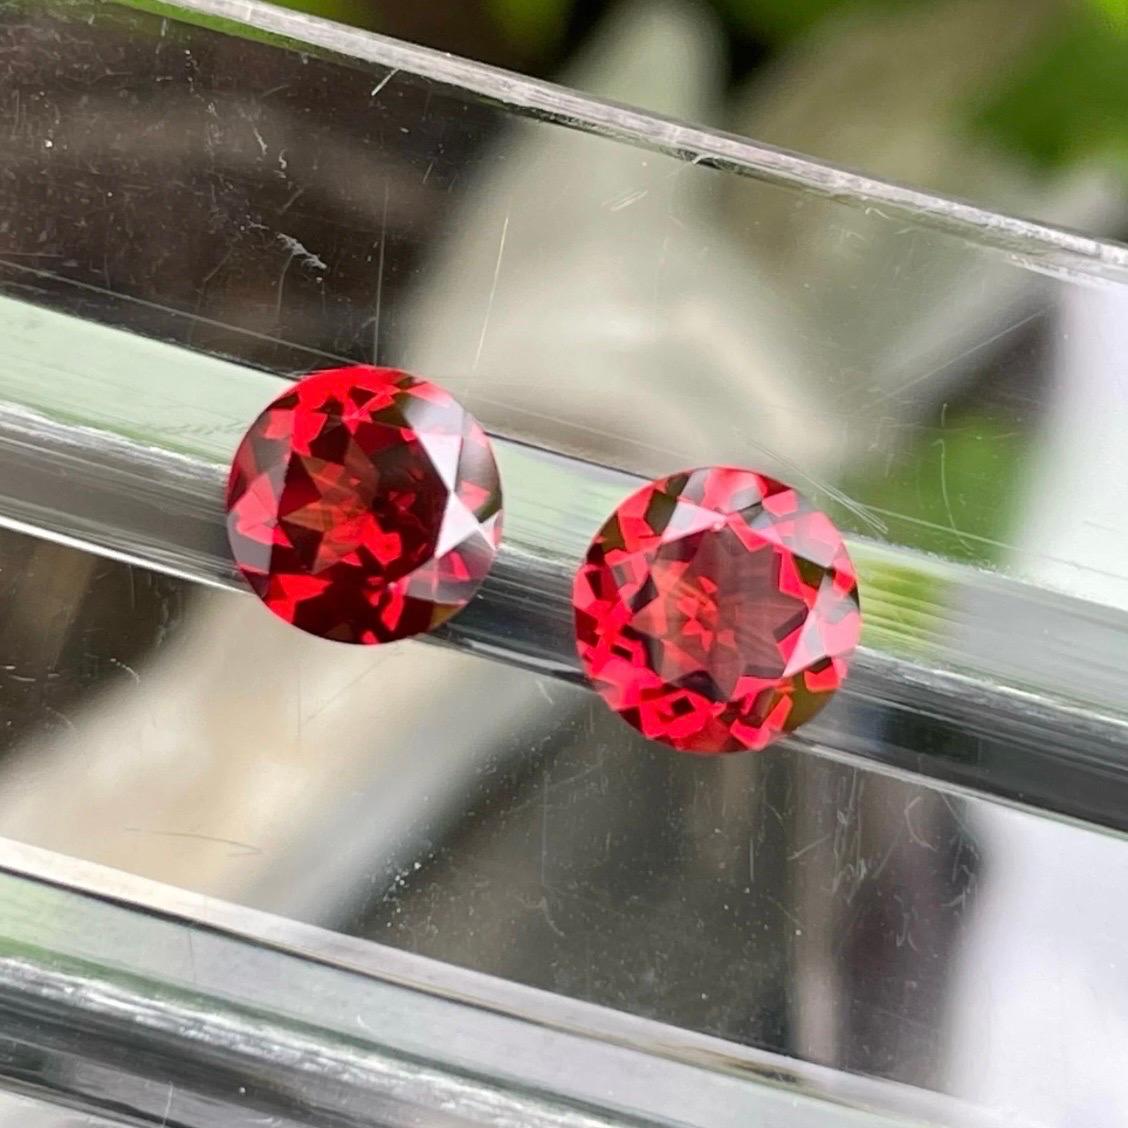 Gemstone Name	Imperial Bright Red Garnet Gemstone
Weight	4.45 Carats
Dimensions	8 x 8mm
Shape	Round
Locality	Round Brilliant
Clarity	Loupe Clean
Treatment	None
Very lustrous fine quality African garnet gemstone pair 